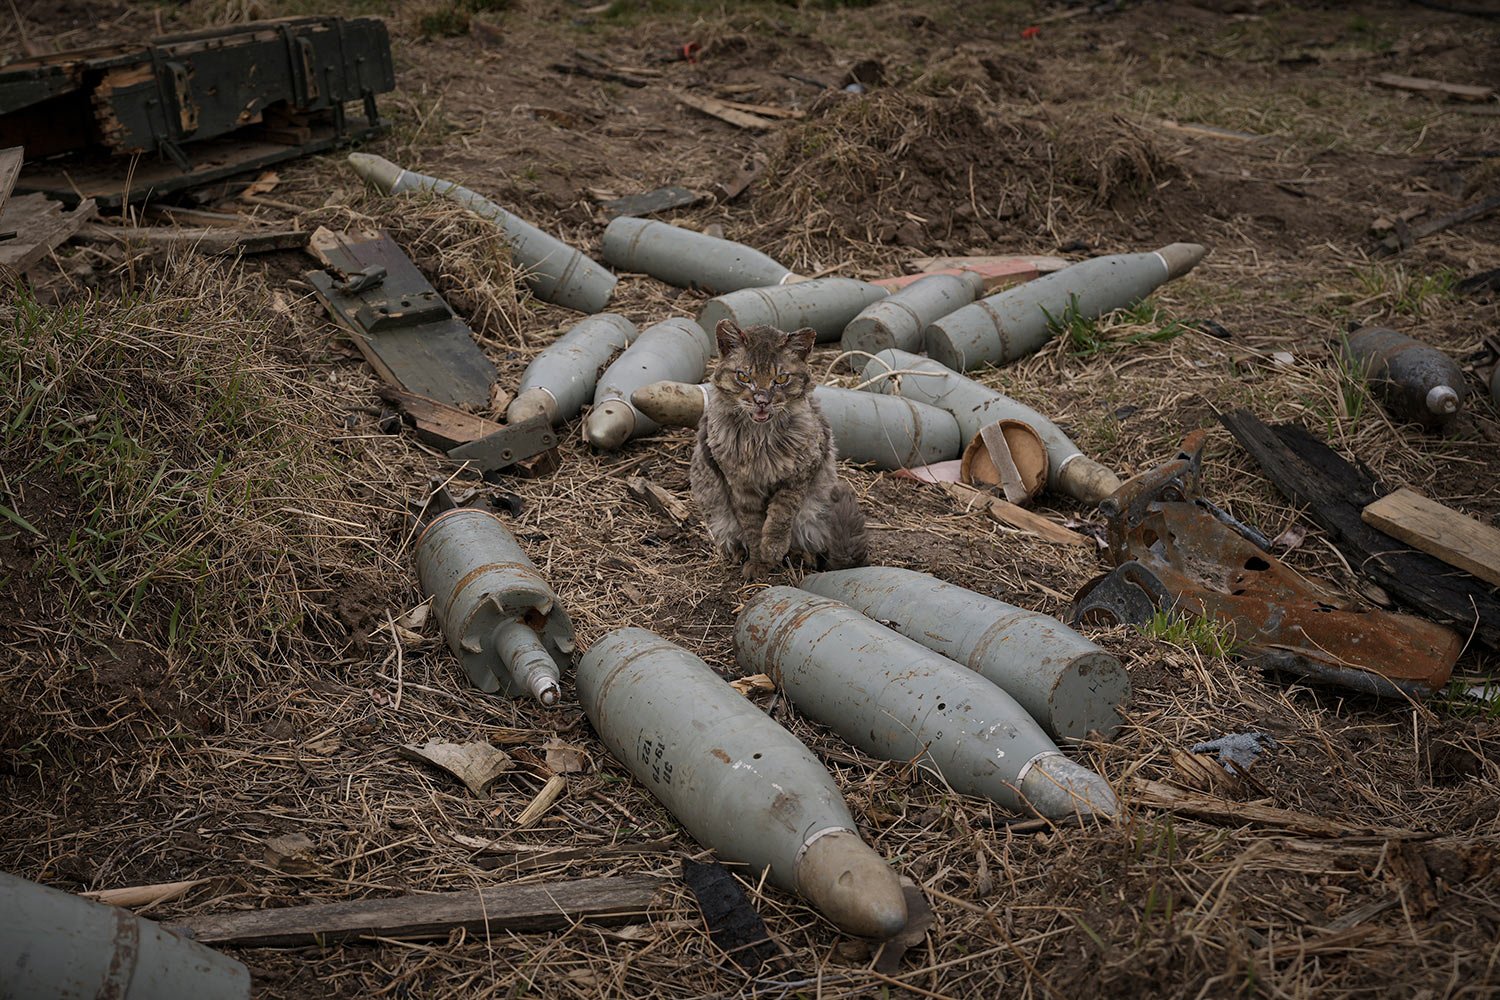  A cat sits between large caliber rounds of ammunition abandoned by retreating Russian forces or retrieved from destroyed fighting vehicles in the village of Andriivka, Ukraine, heavily affected by fighting between Russian and Ukrainian forces, Wedne